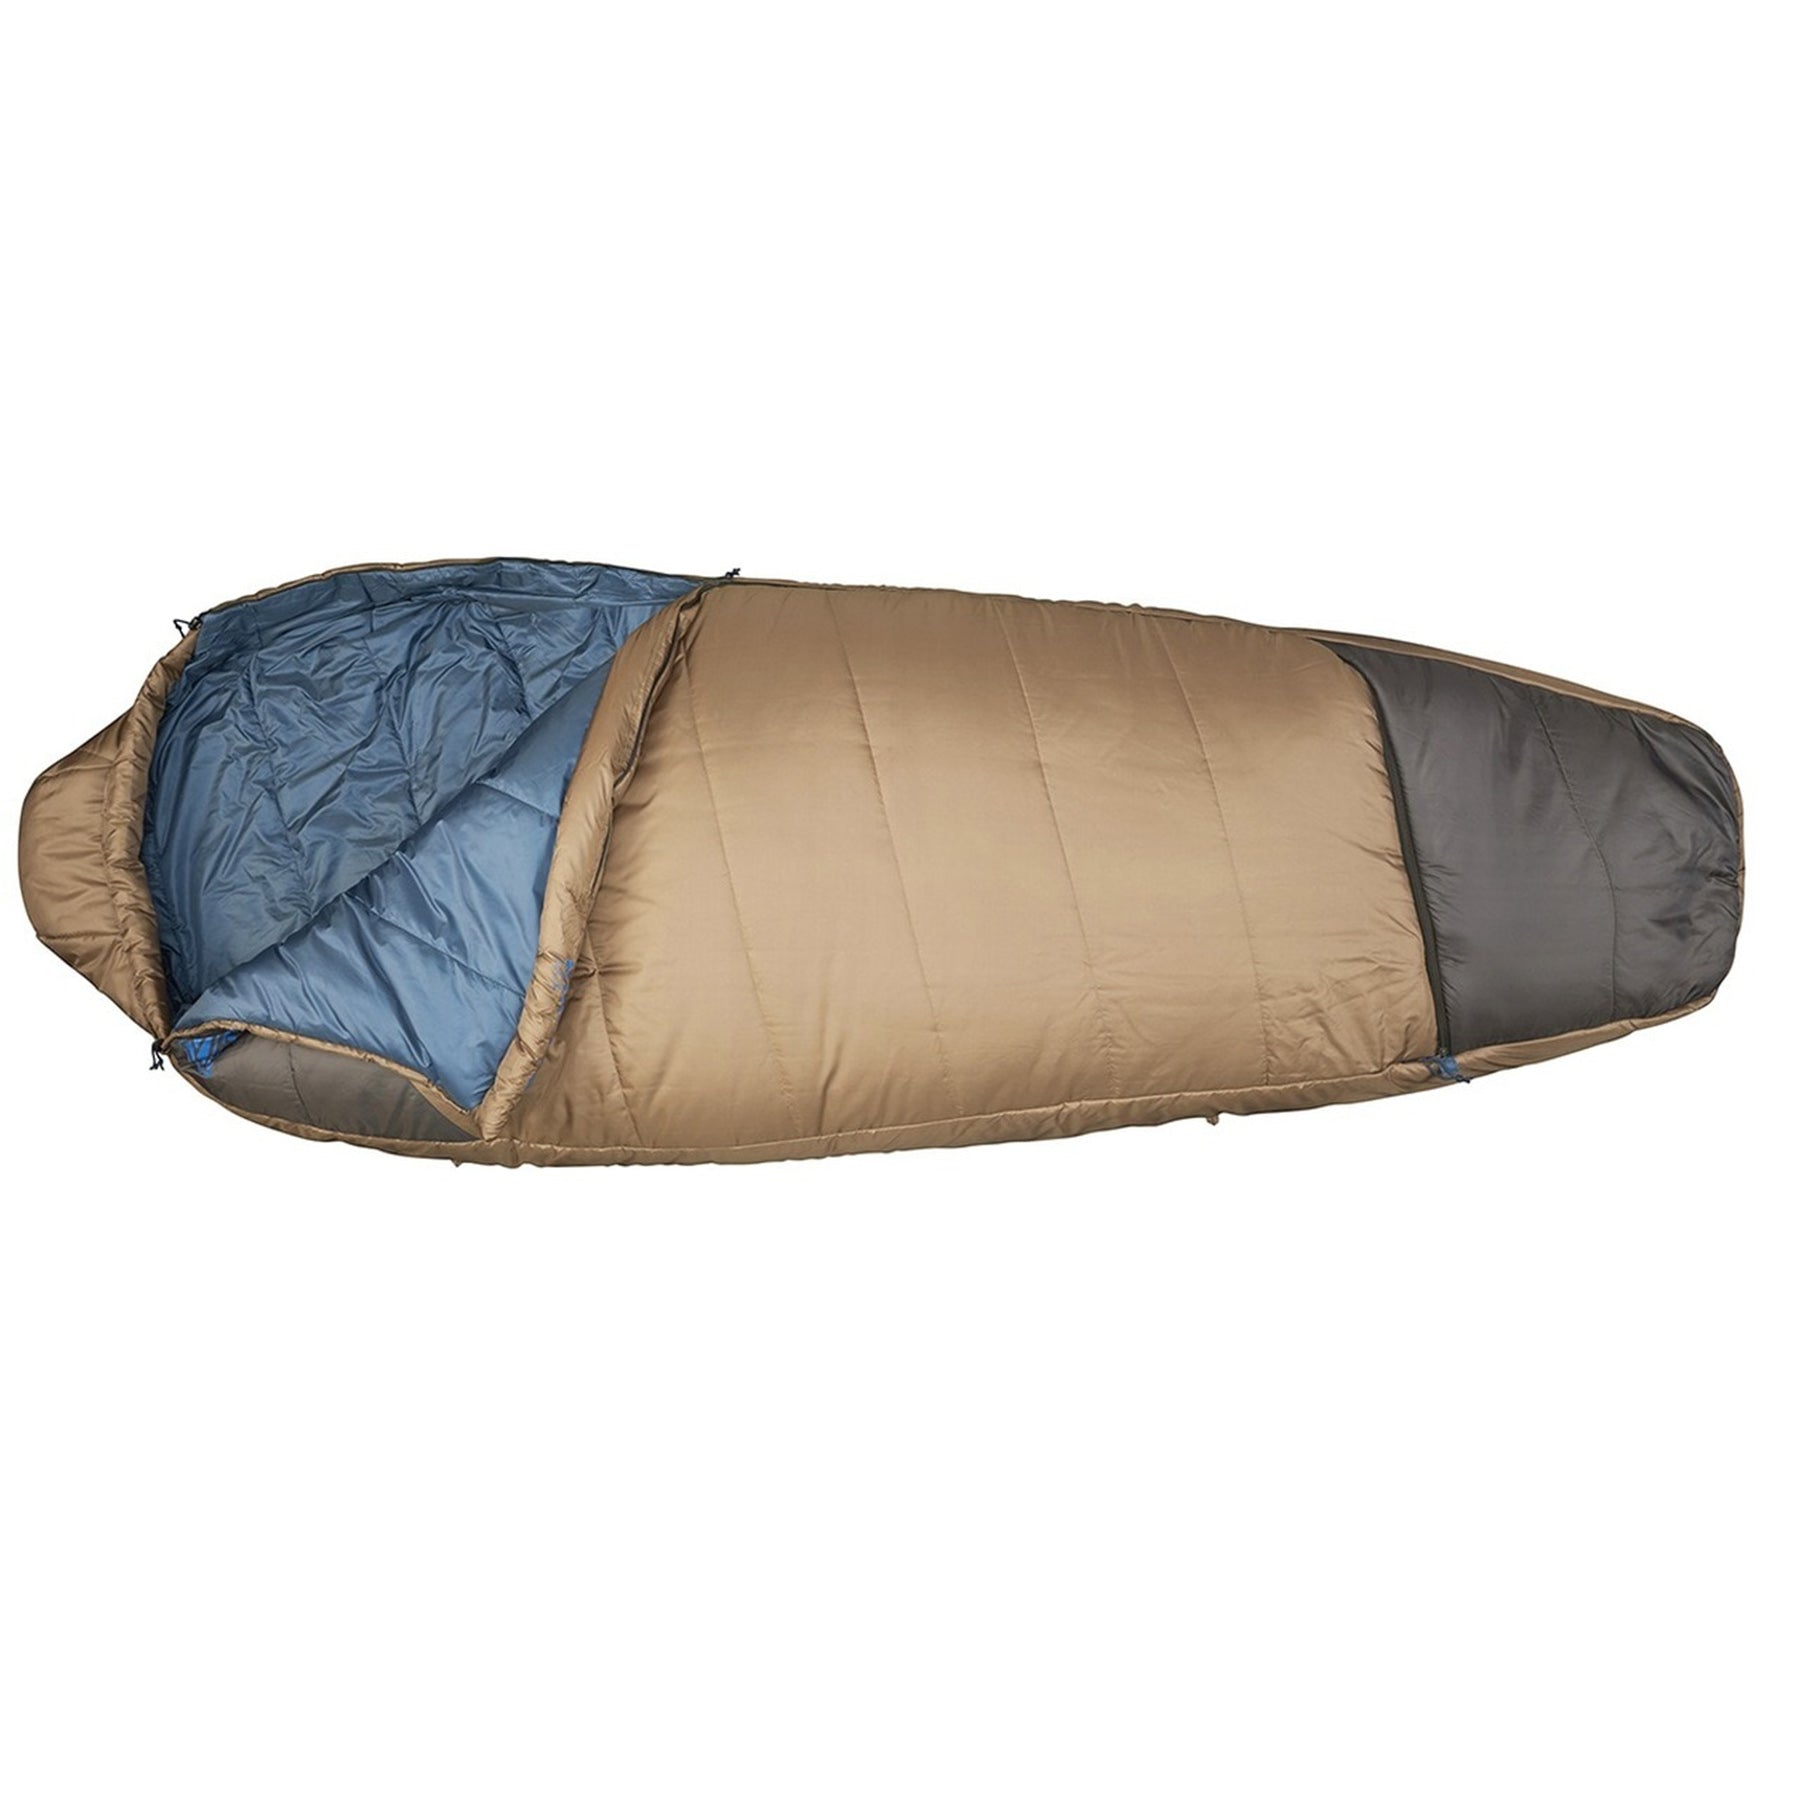 the tuck 20 sleeping bag partially unzipped